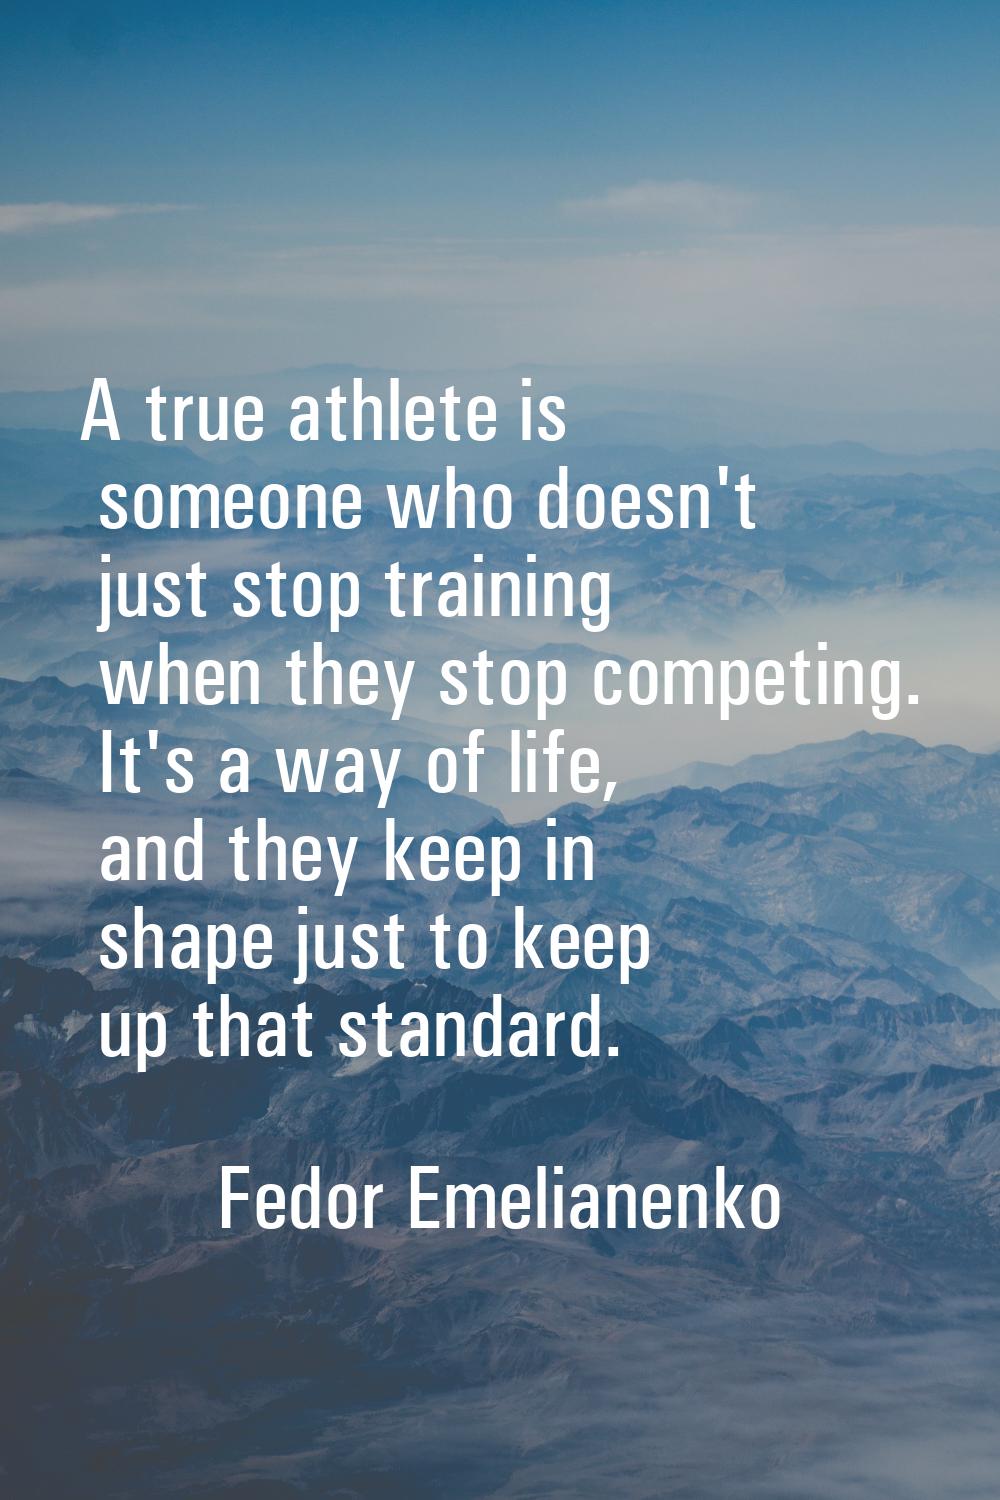 A true athlete is someone who doesn't just stop training when they stop competing. It's a way of li